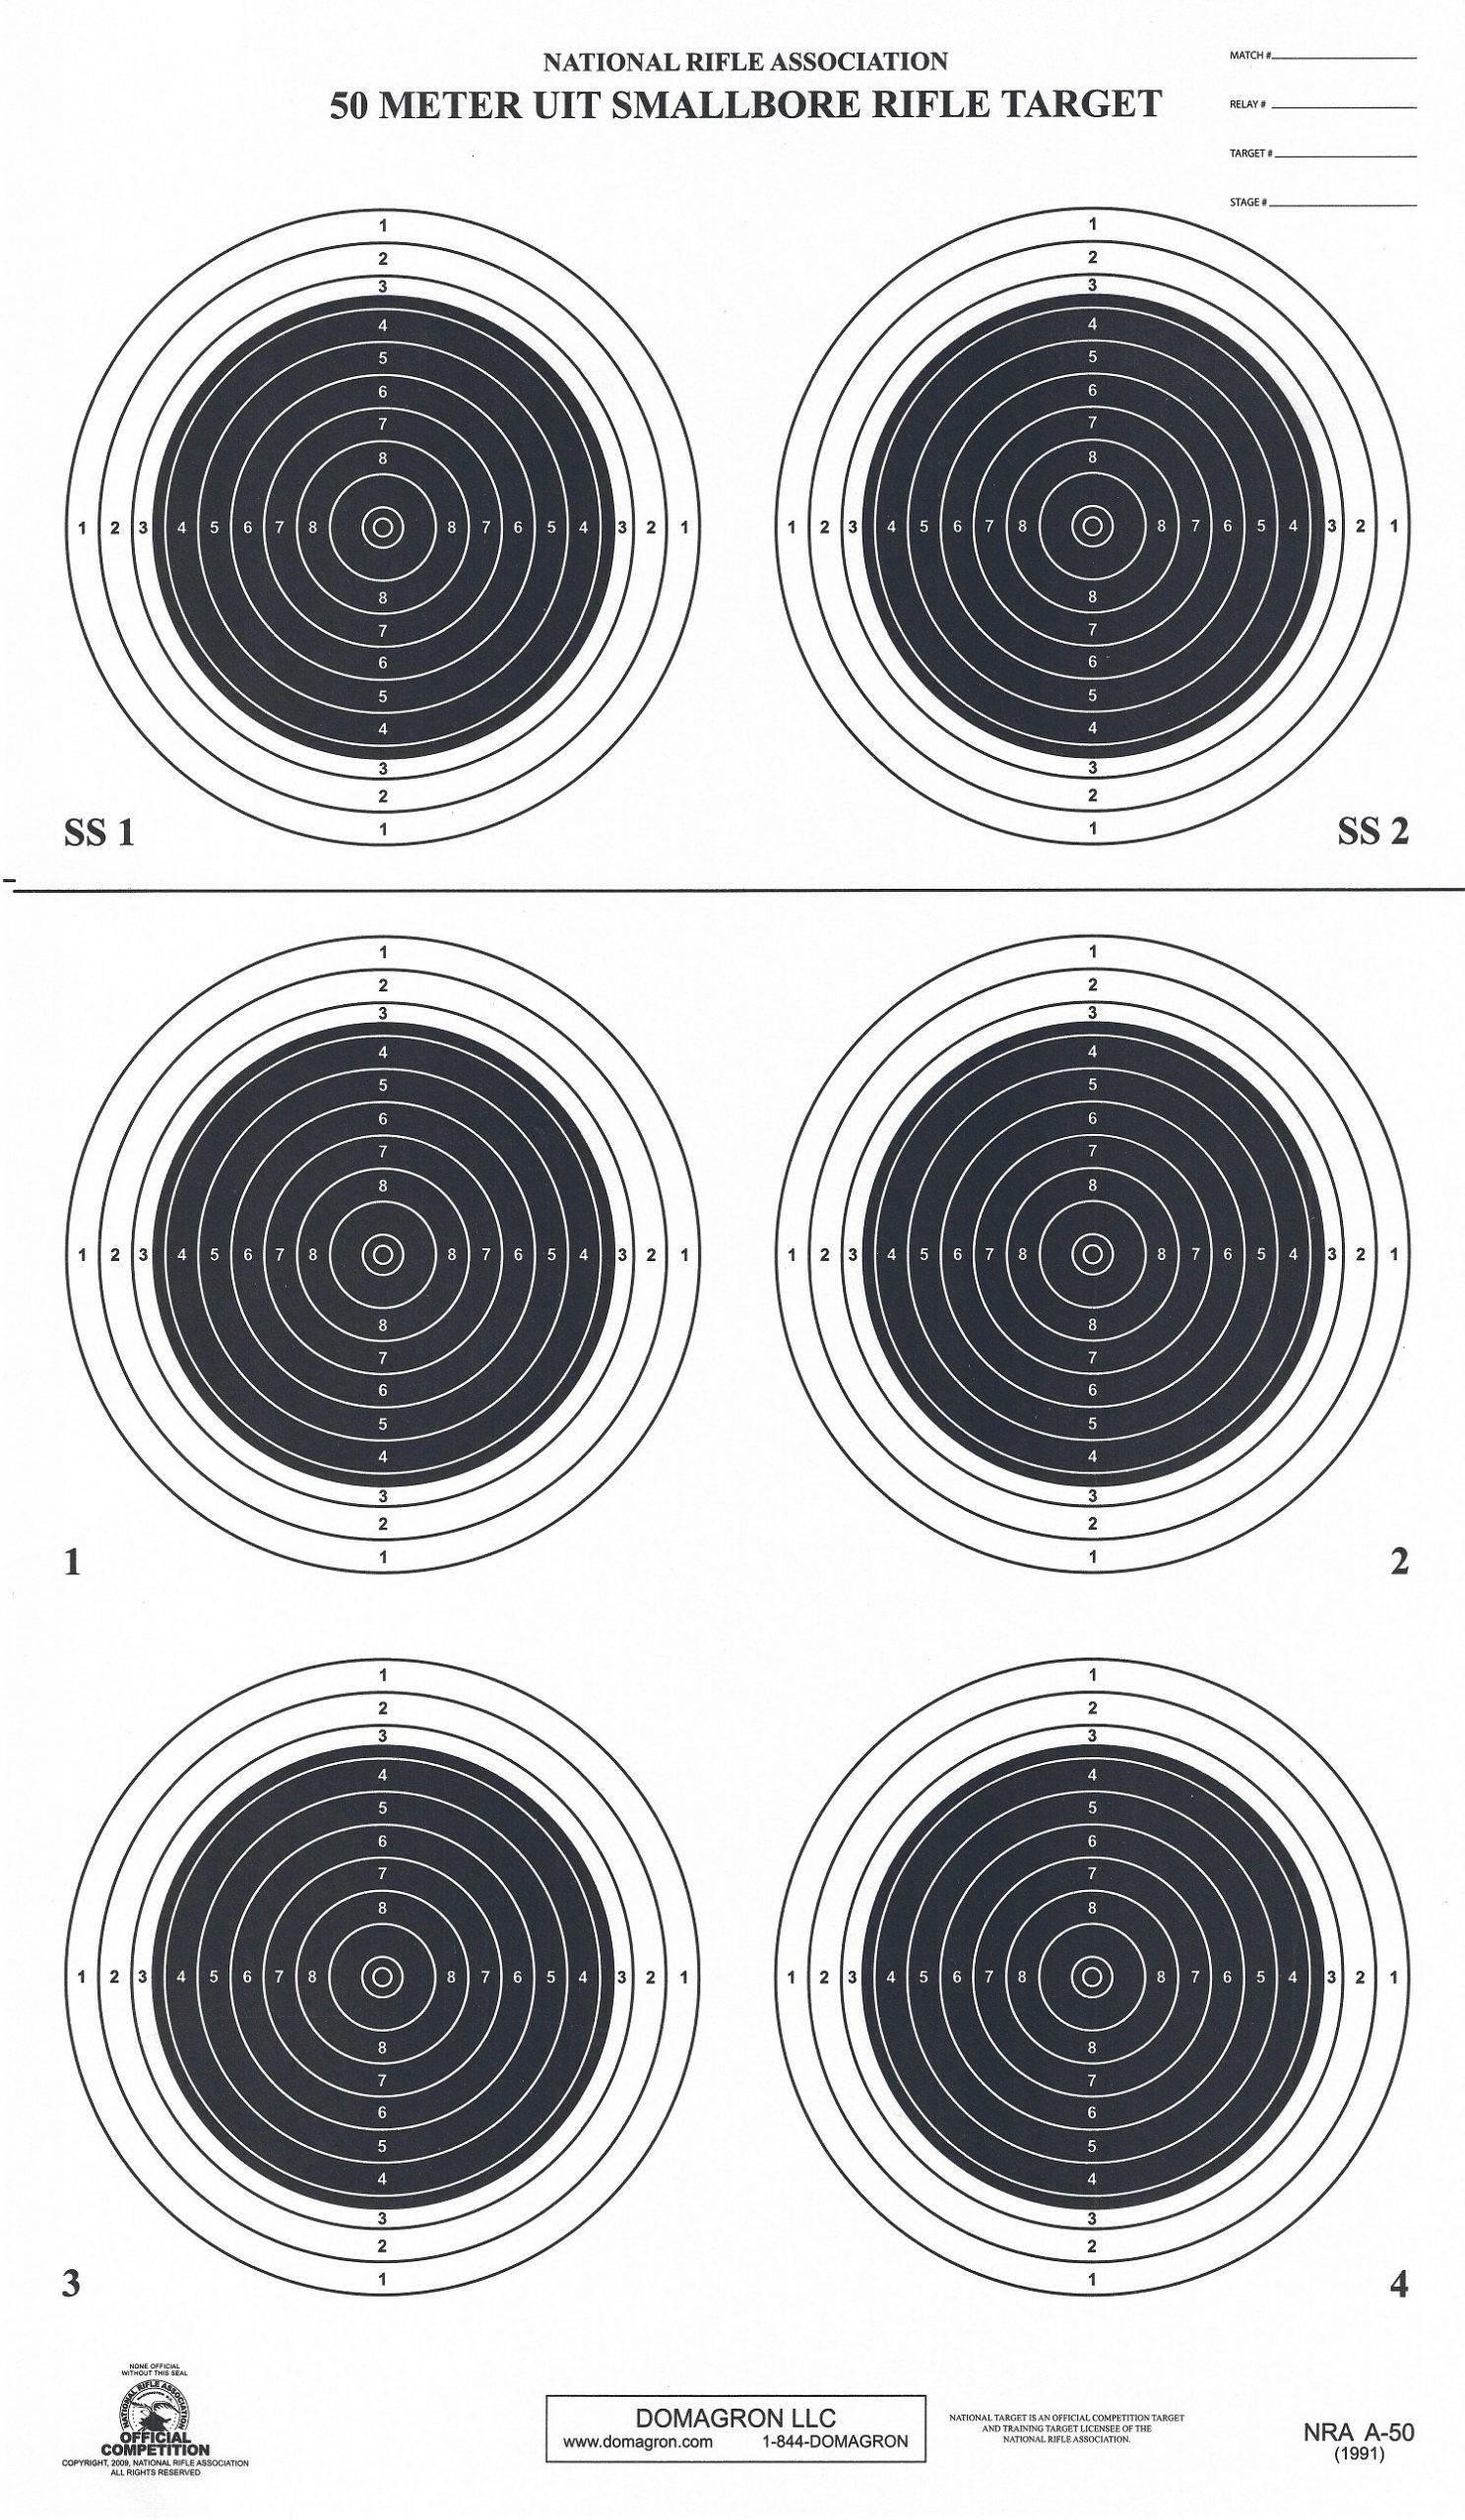 a-50-50-meter-smallbore-rifle-target-pack-of-100-domagron